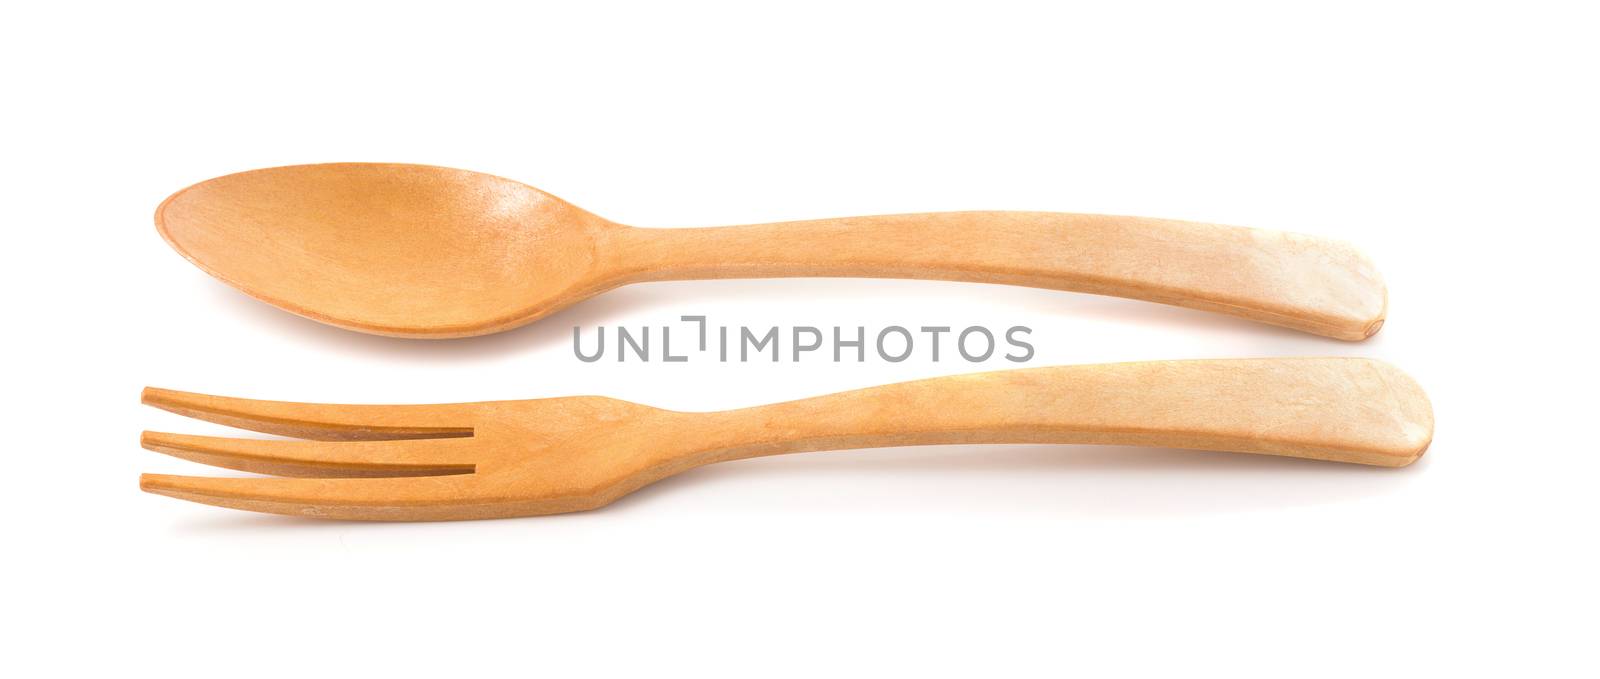 Wooden Spoon and fork isolated on a white background by kaiskynet